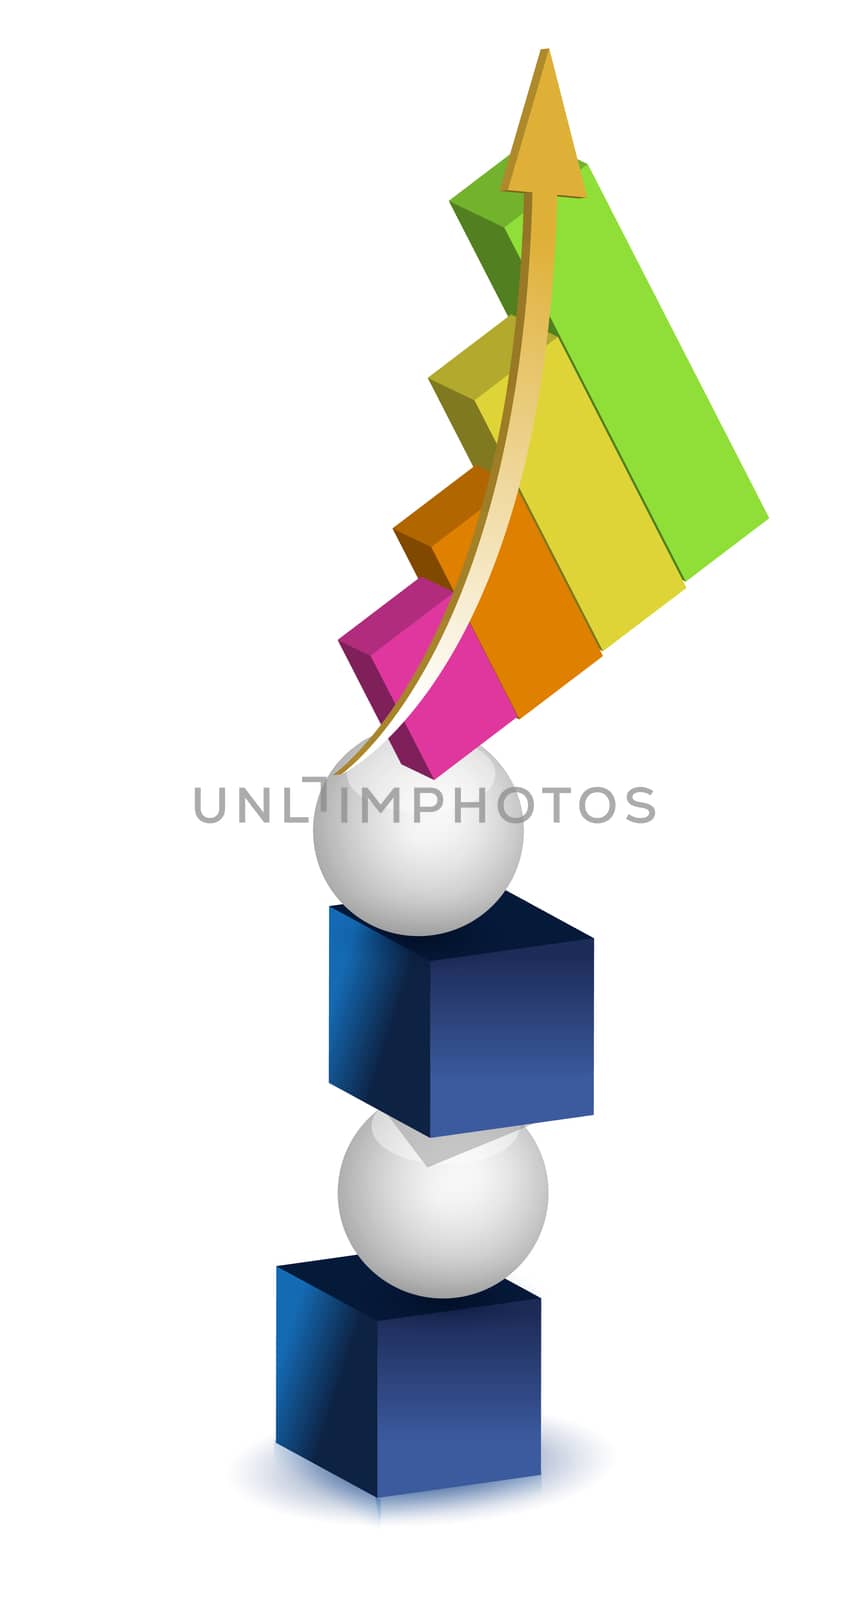 balancing graph illustration design over a white background by alexmillos